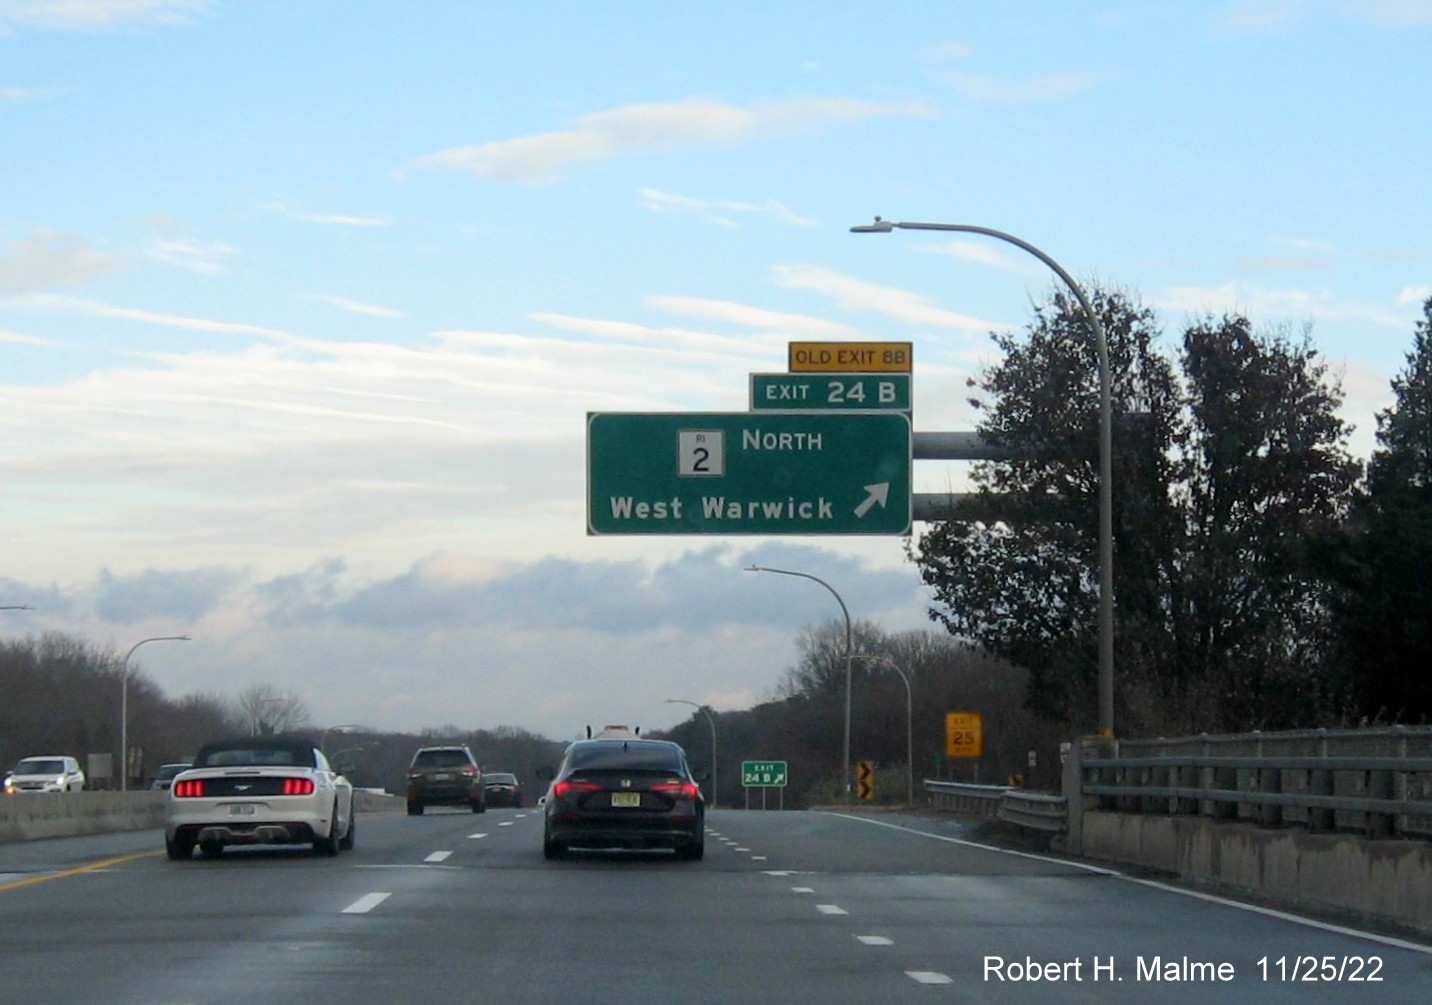 Image of overhead ramp sign for RI 2 North exit with new milepost based exit number and yellow Old Exit 8B sign above exit tab on I-95 North in West Warwick, November 2022